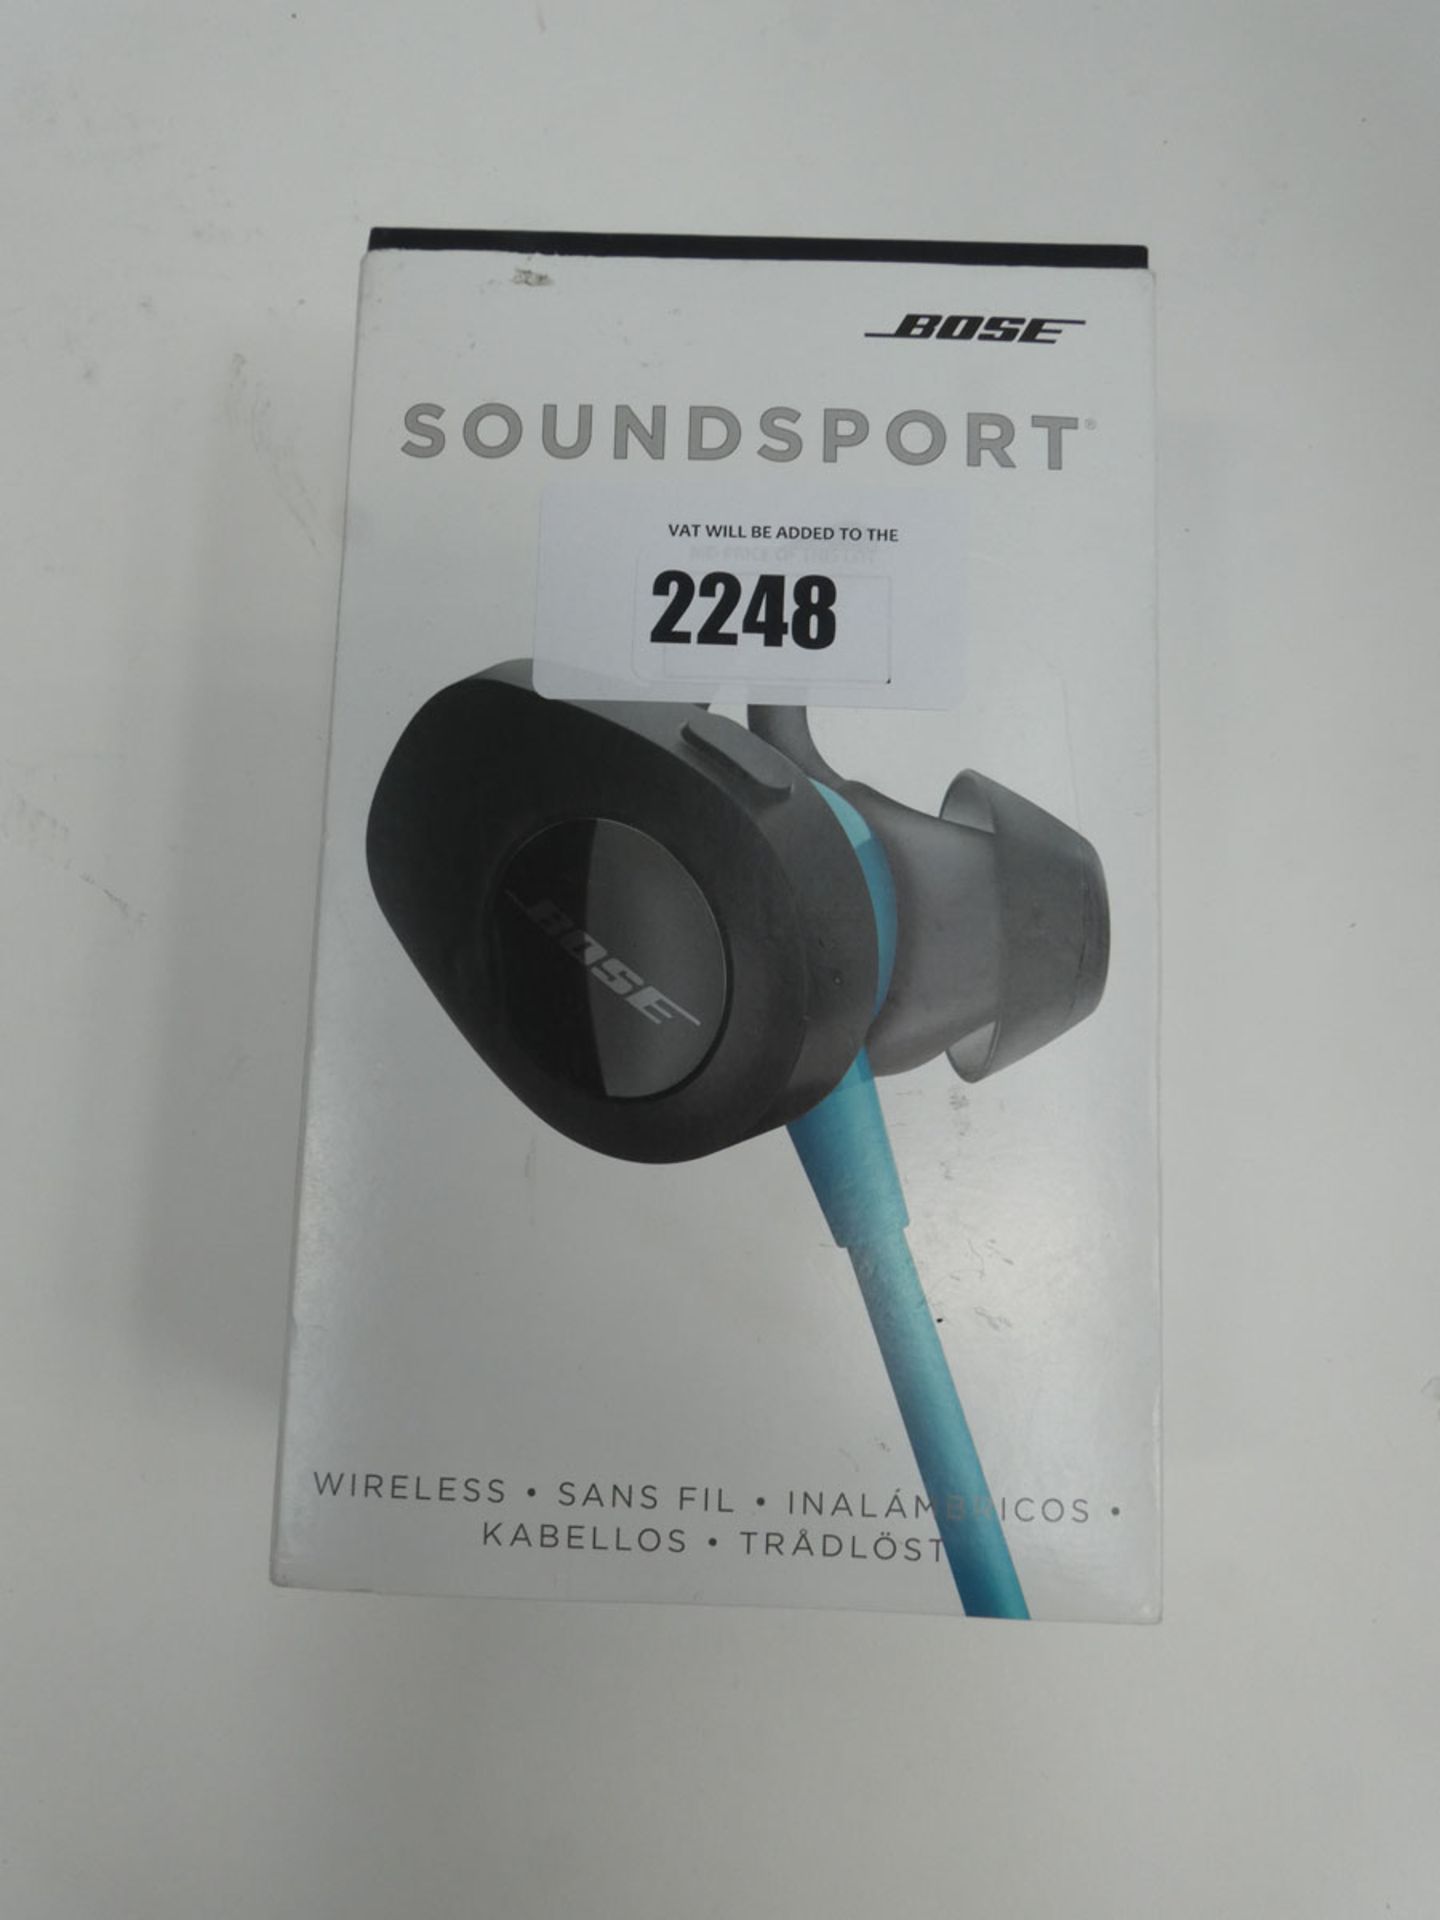 Bose SoundSport wireless earphones Item is used, can connect to bluetooth and play music